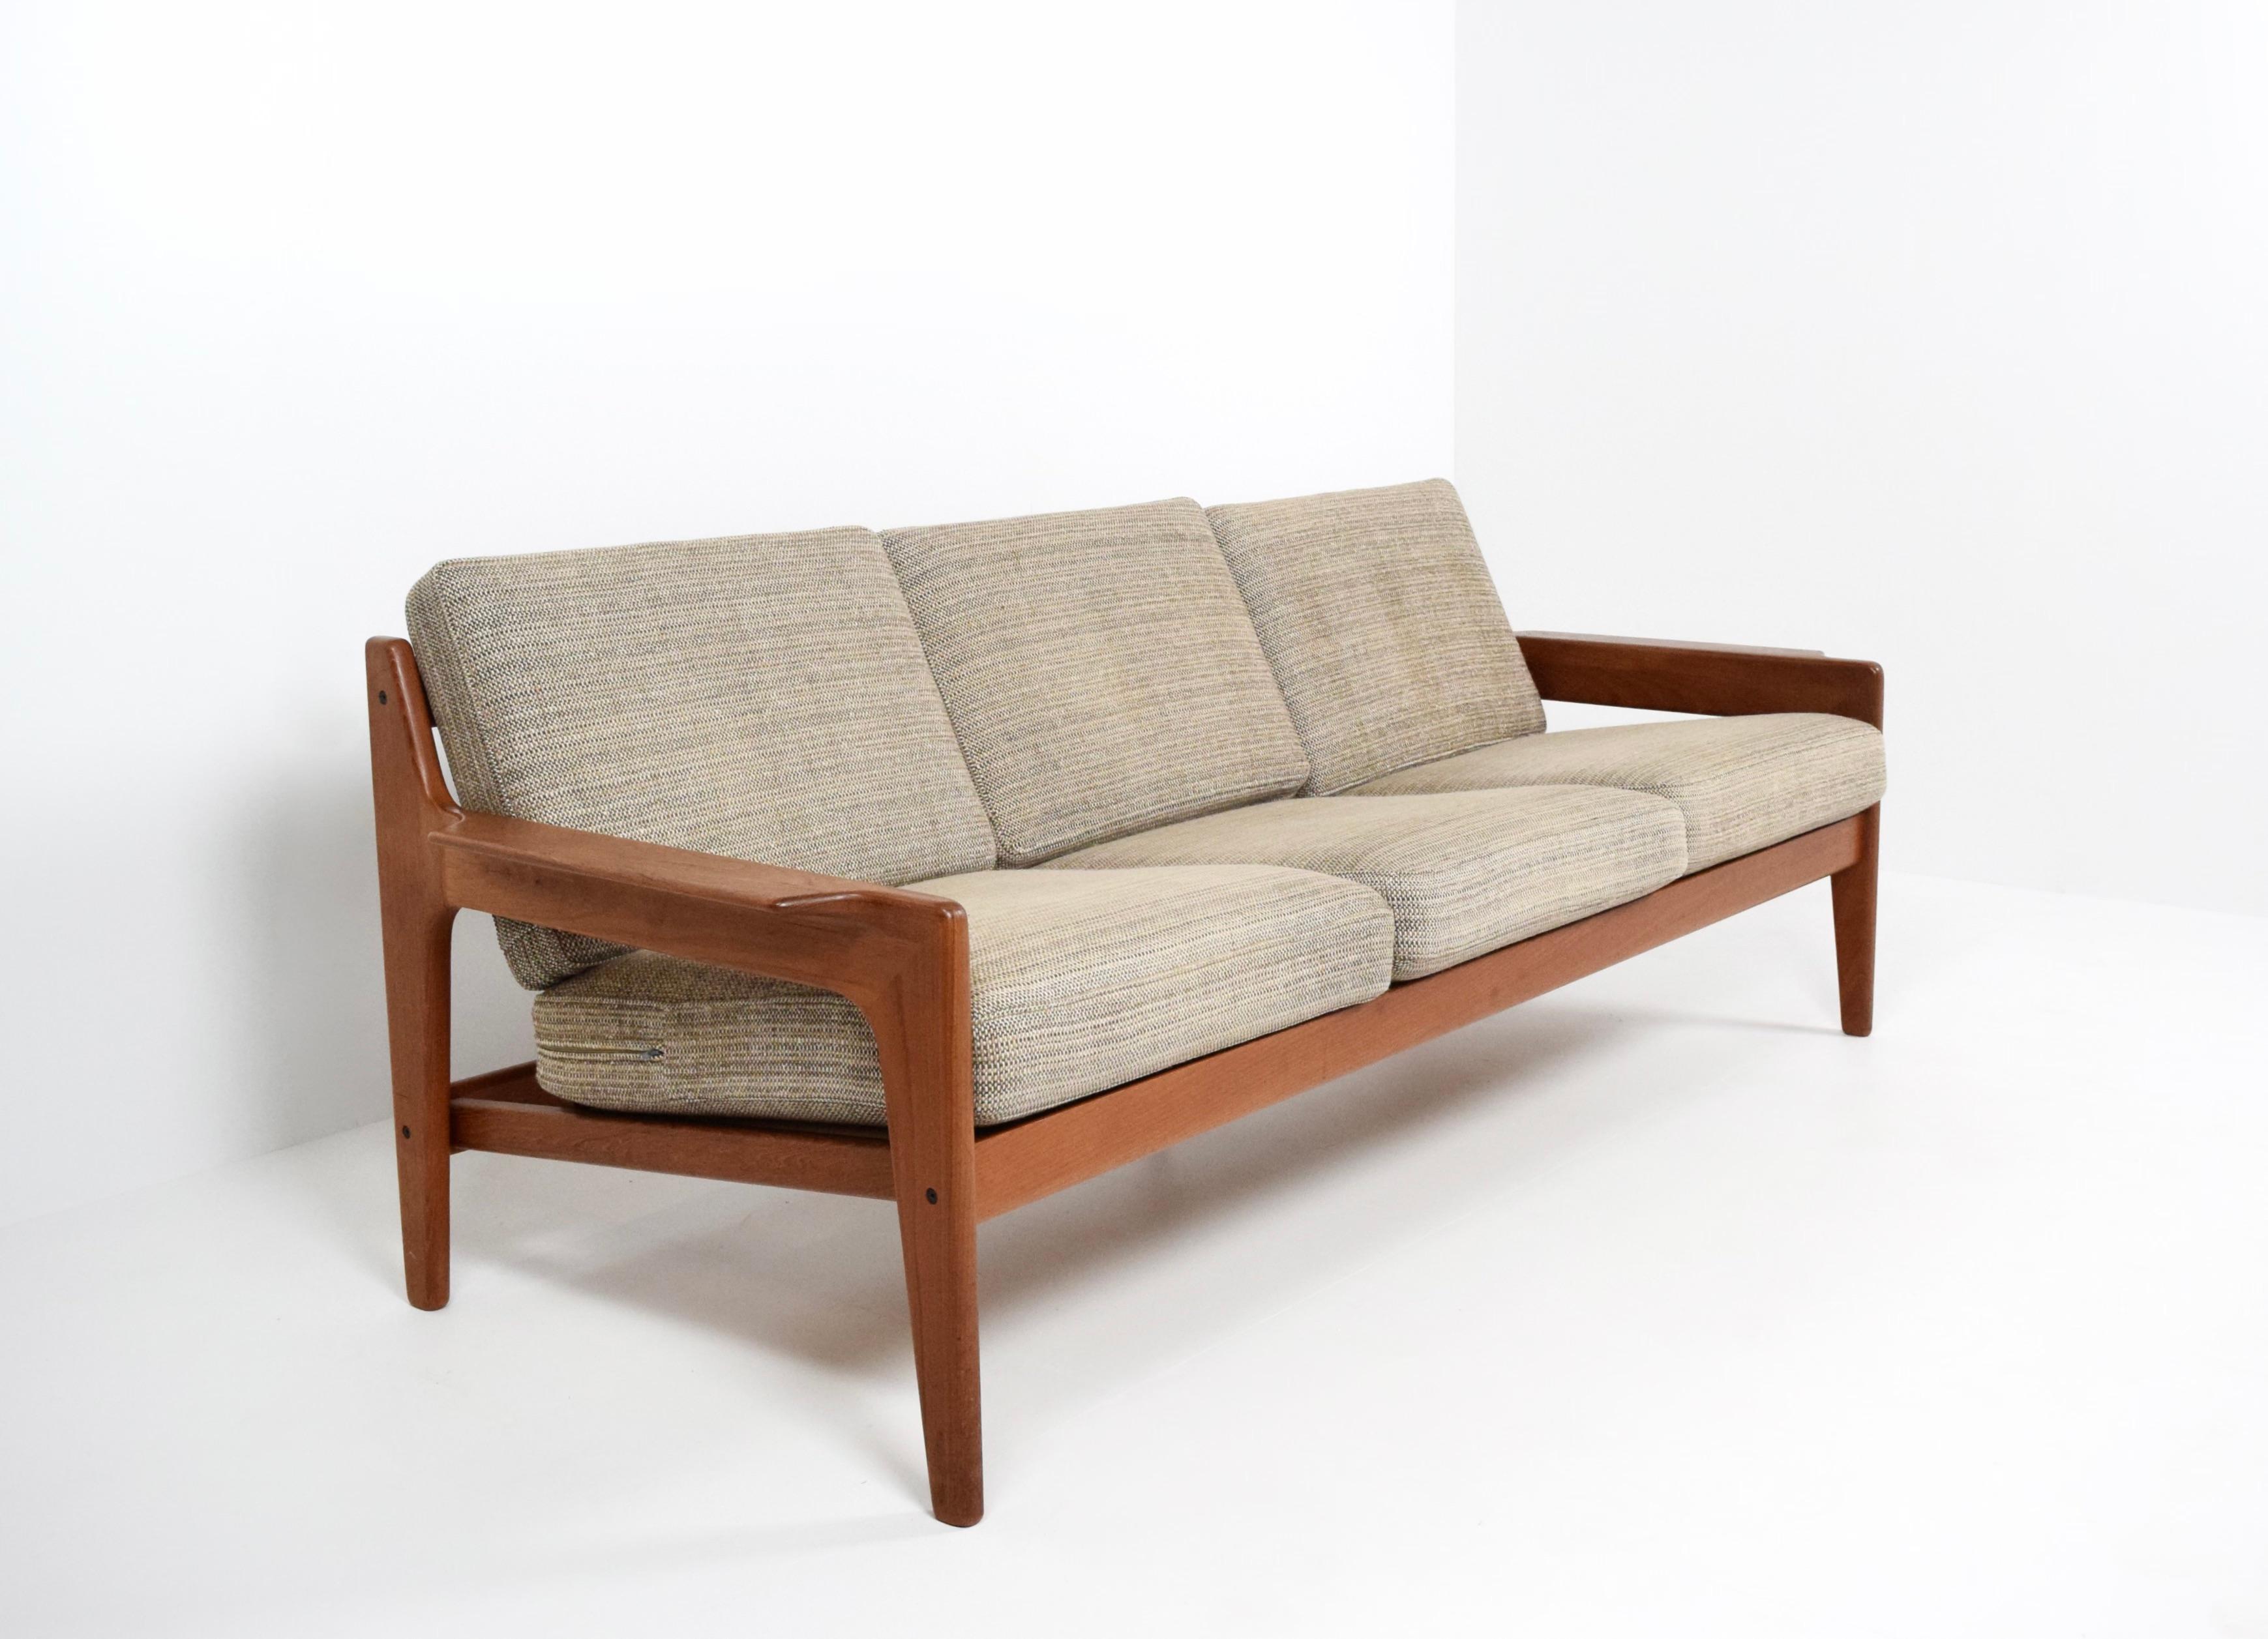 Stylish Arne Wahl Iversen three-seat sofa for Komfort from Denmark. This solid teak sofa has a very clean design with the characteristic elements for midcentury Danish design. The armrests and back of the sofa particularly stand out, having an